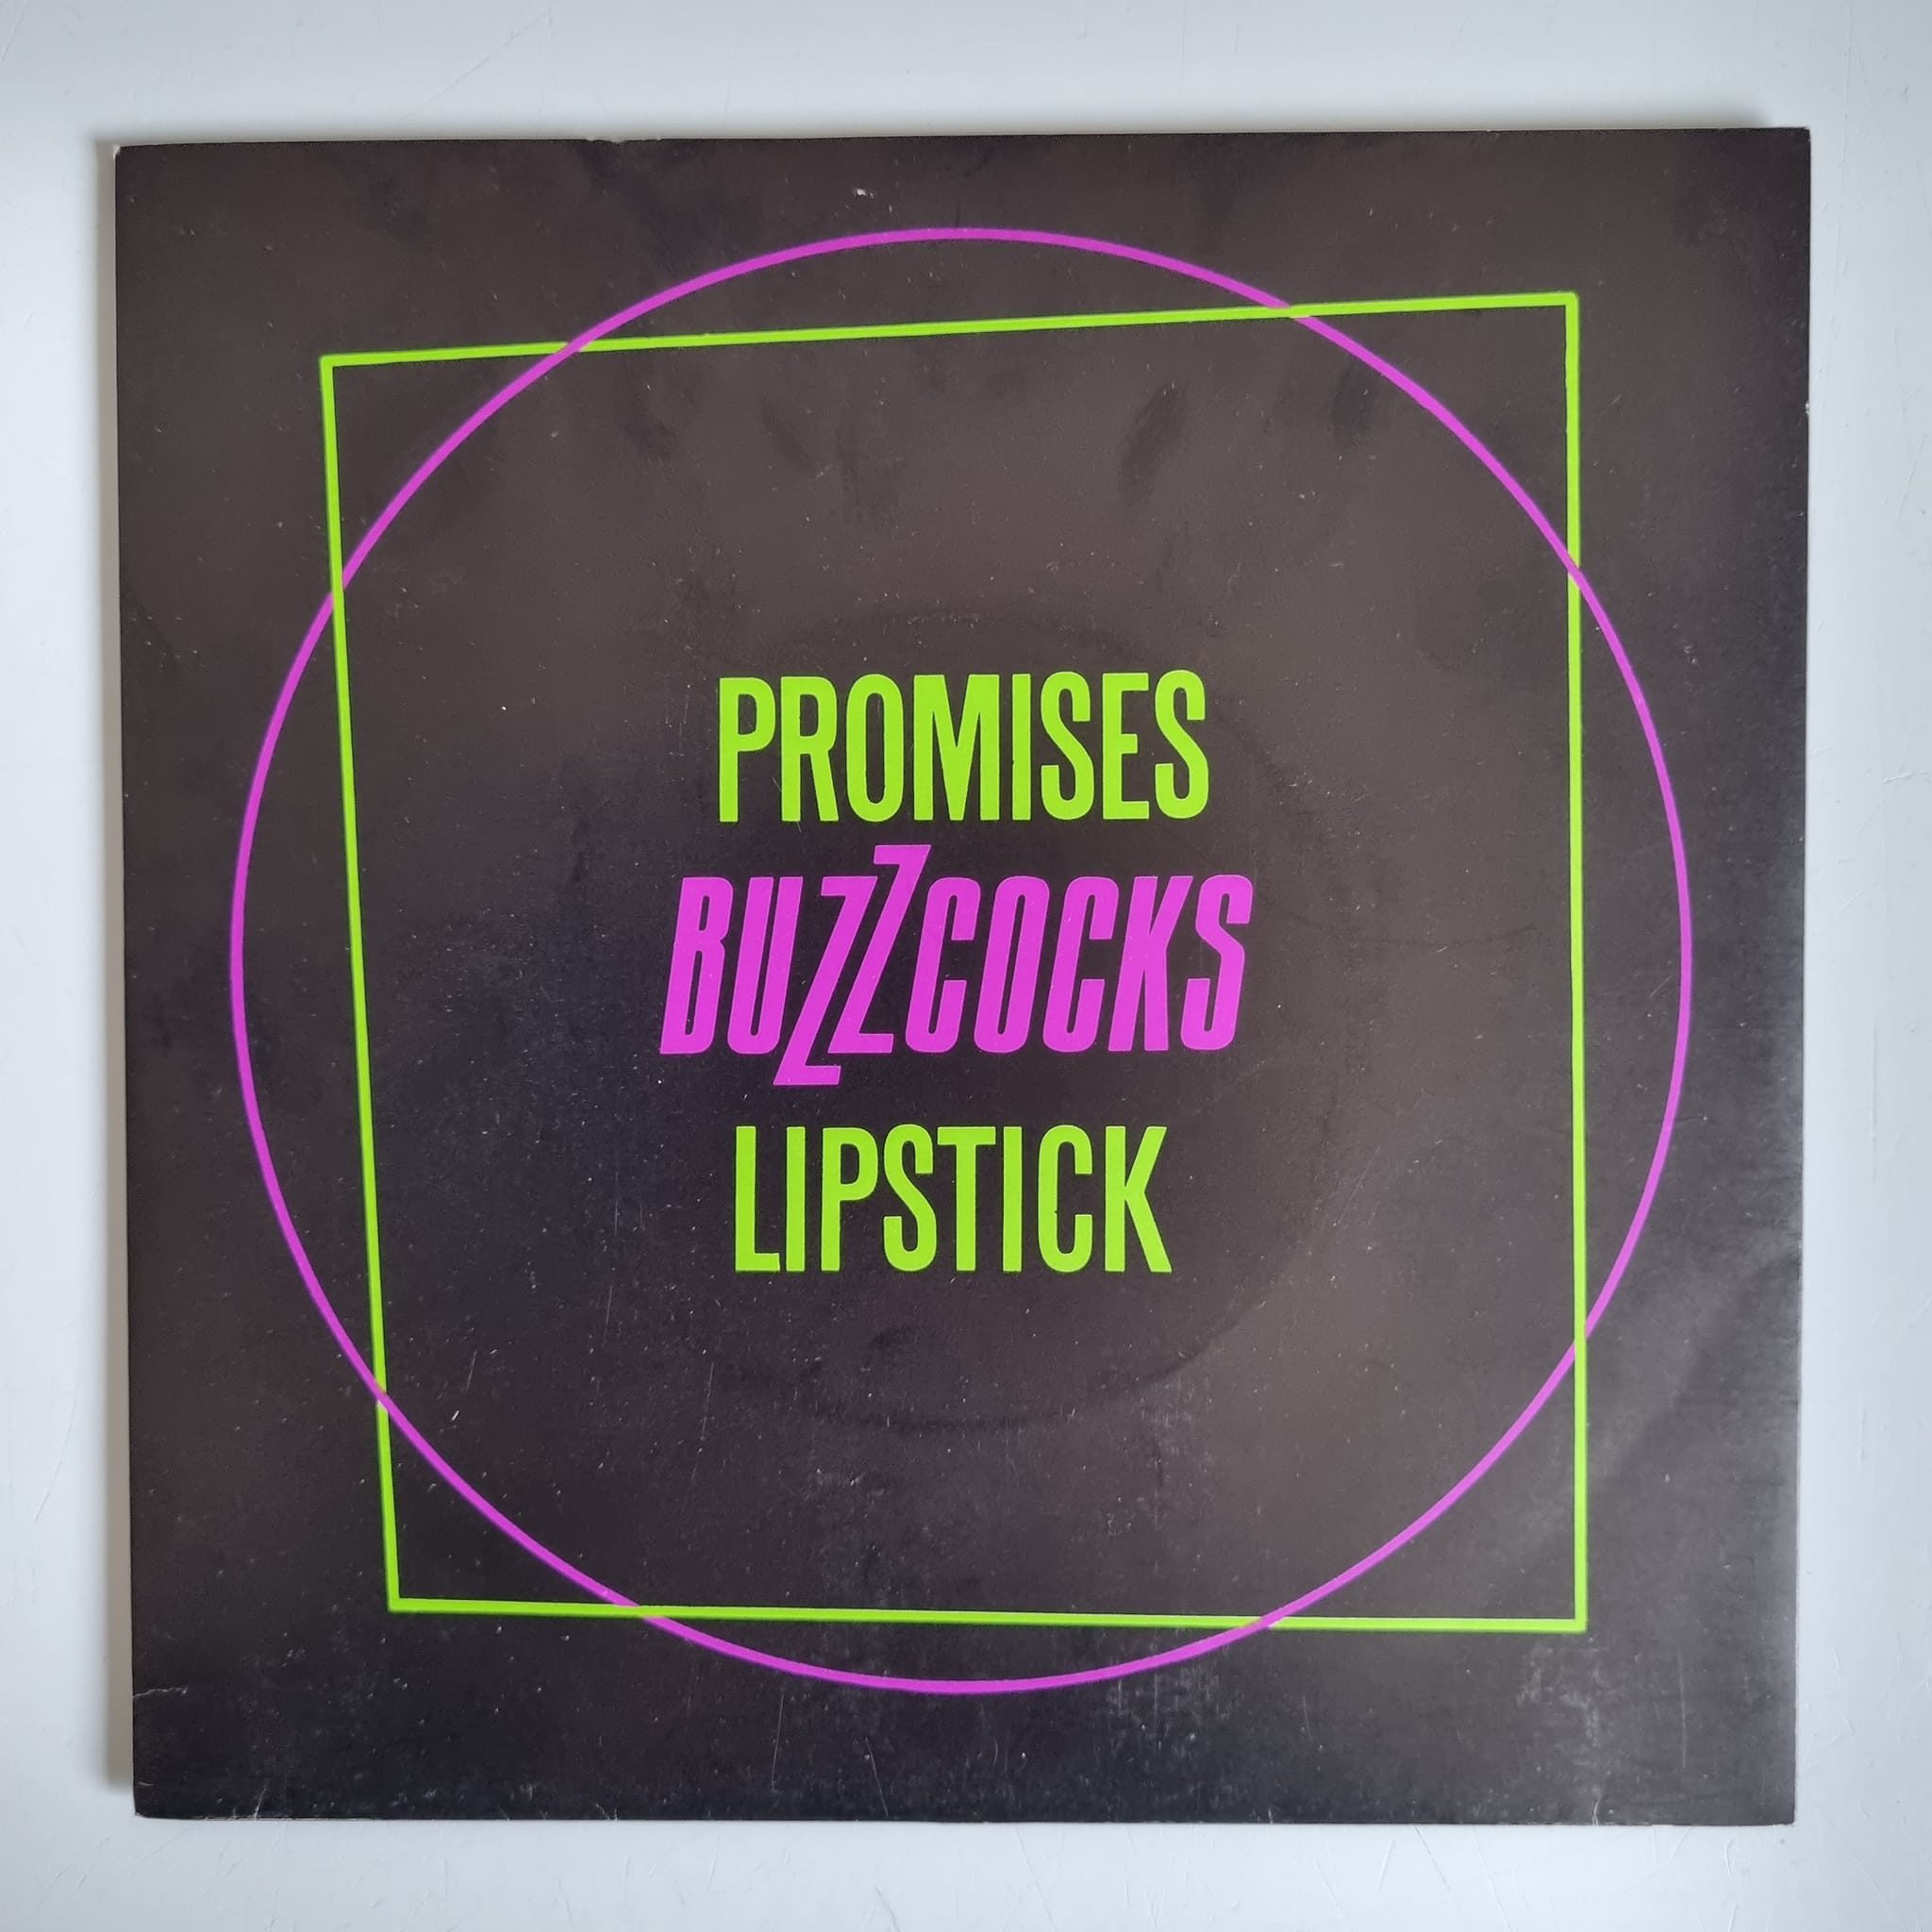 Buy this rare Buzzcocks record by clicking here